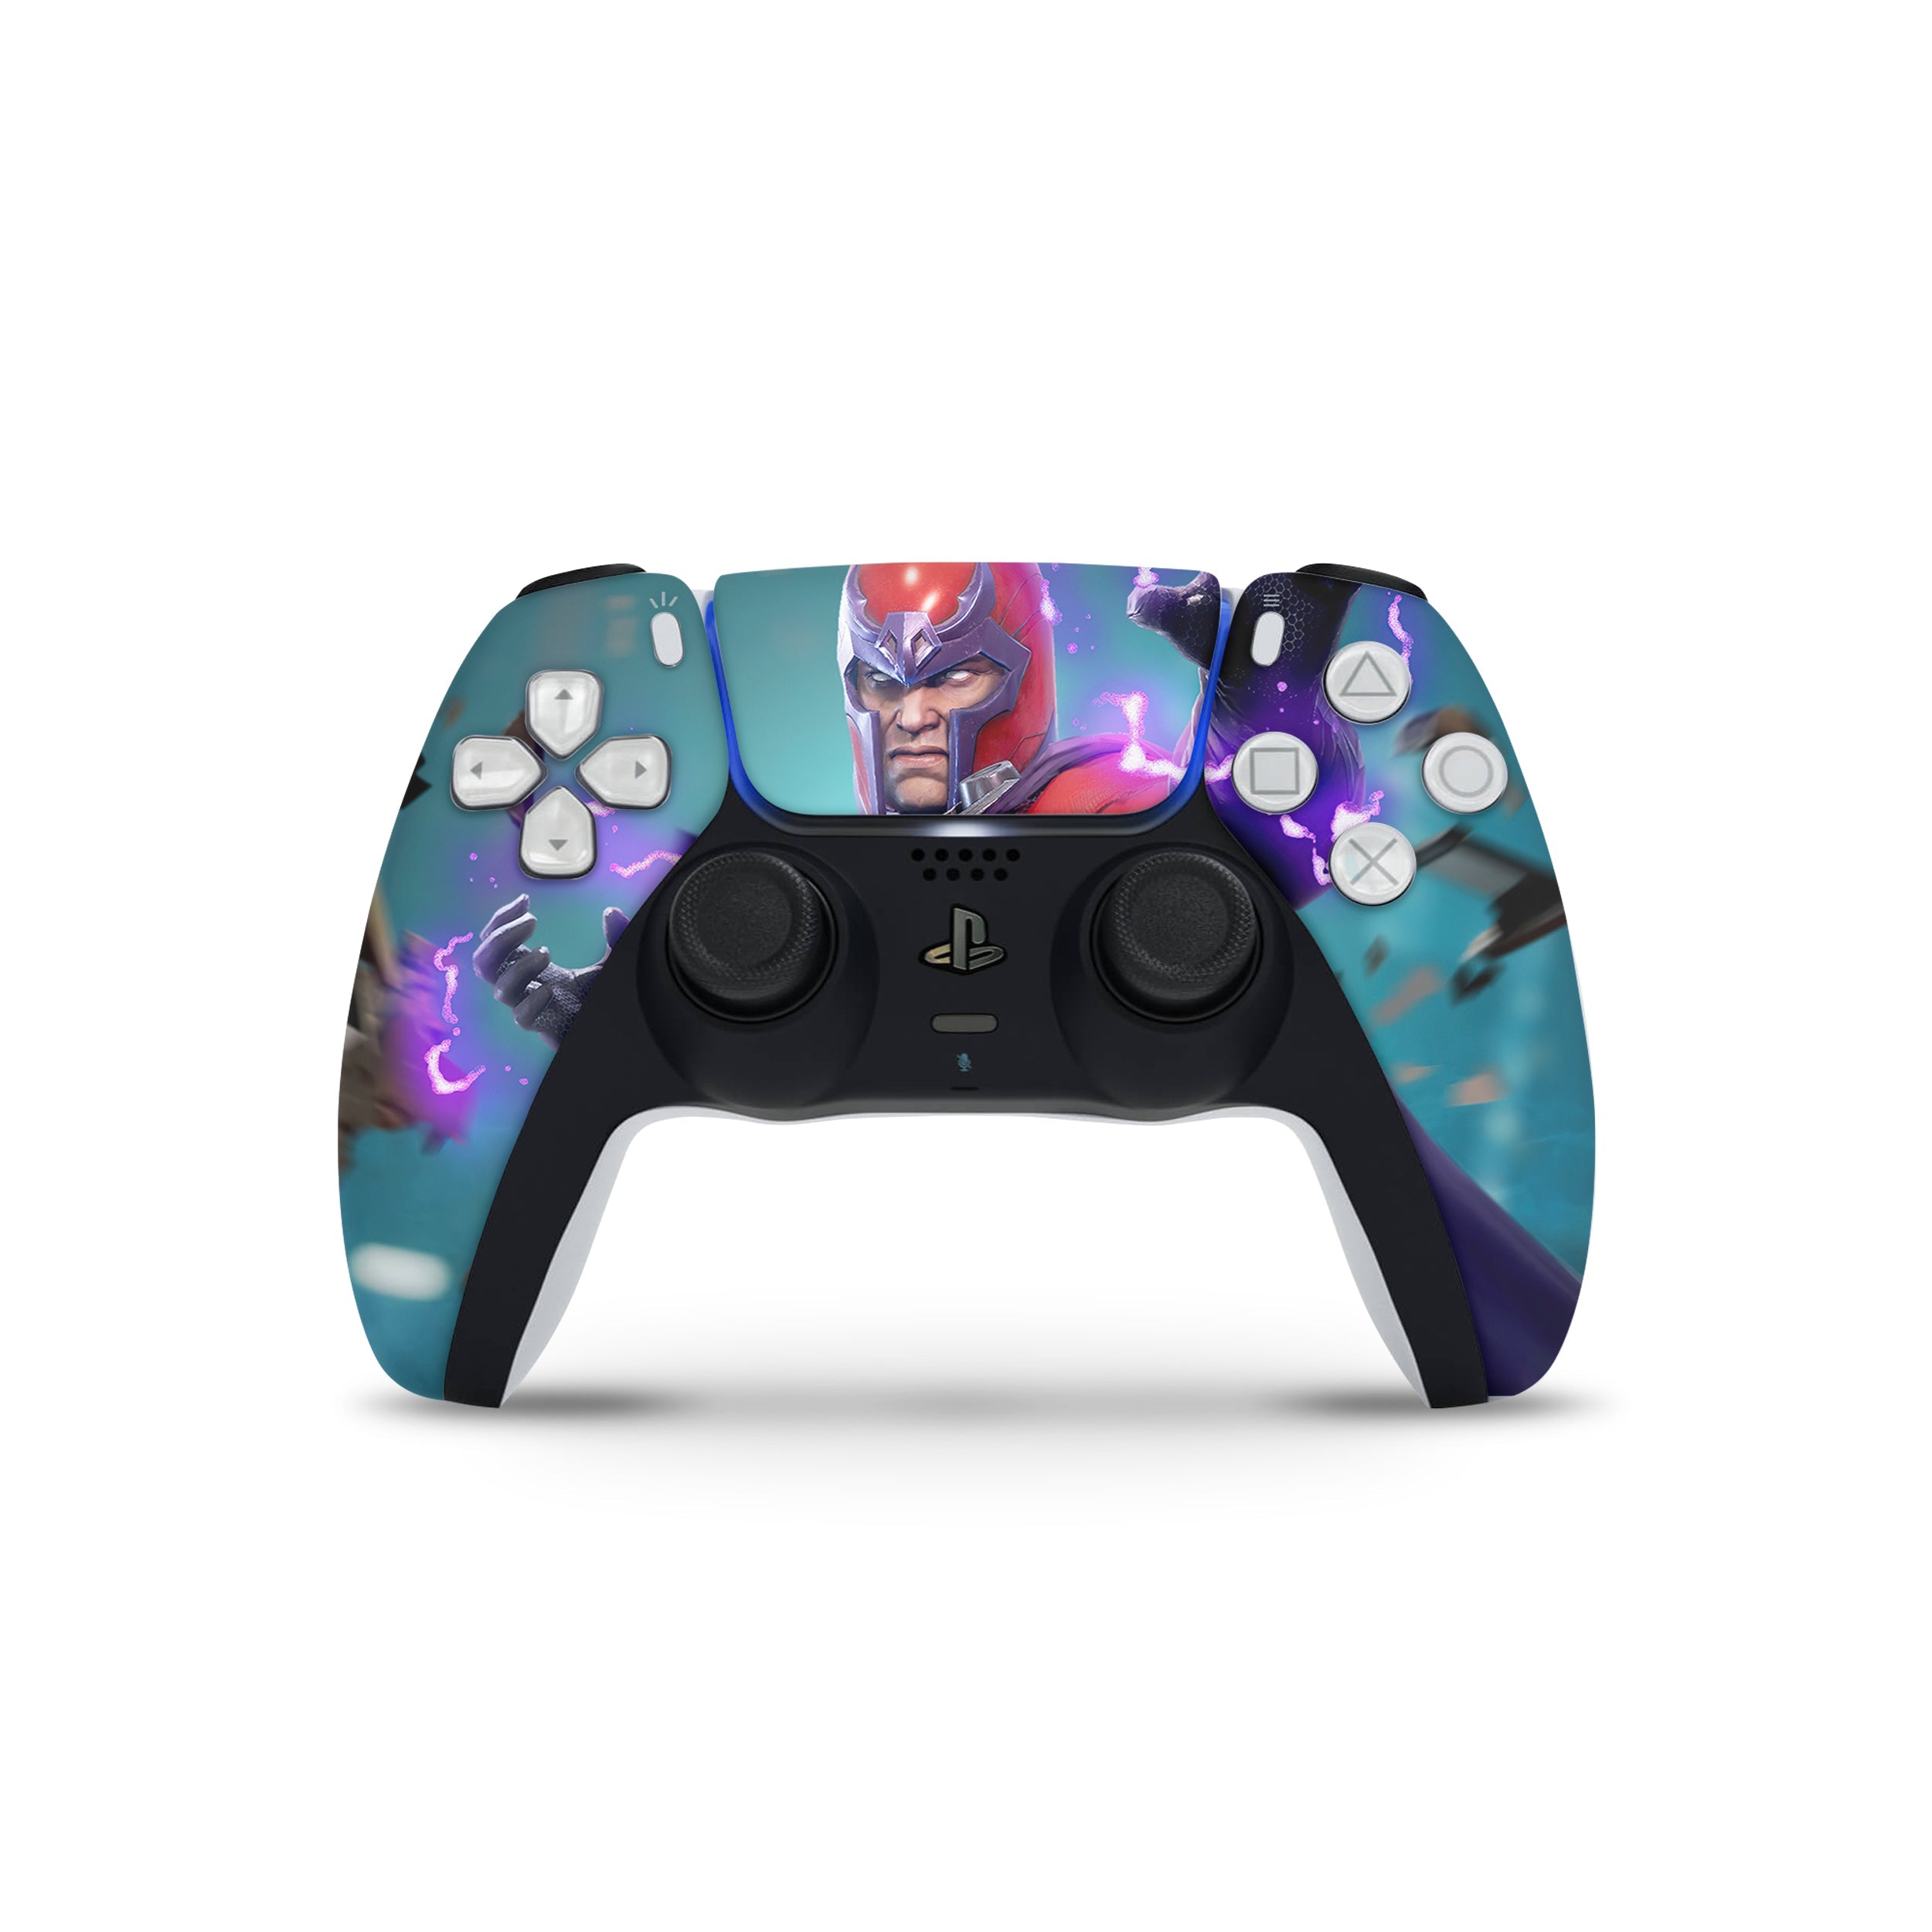 A video game skin featuring a Marvel Comics X Men Magneto design for the PS5 DualSense Controller.